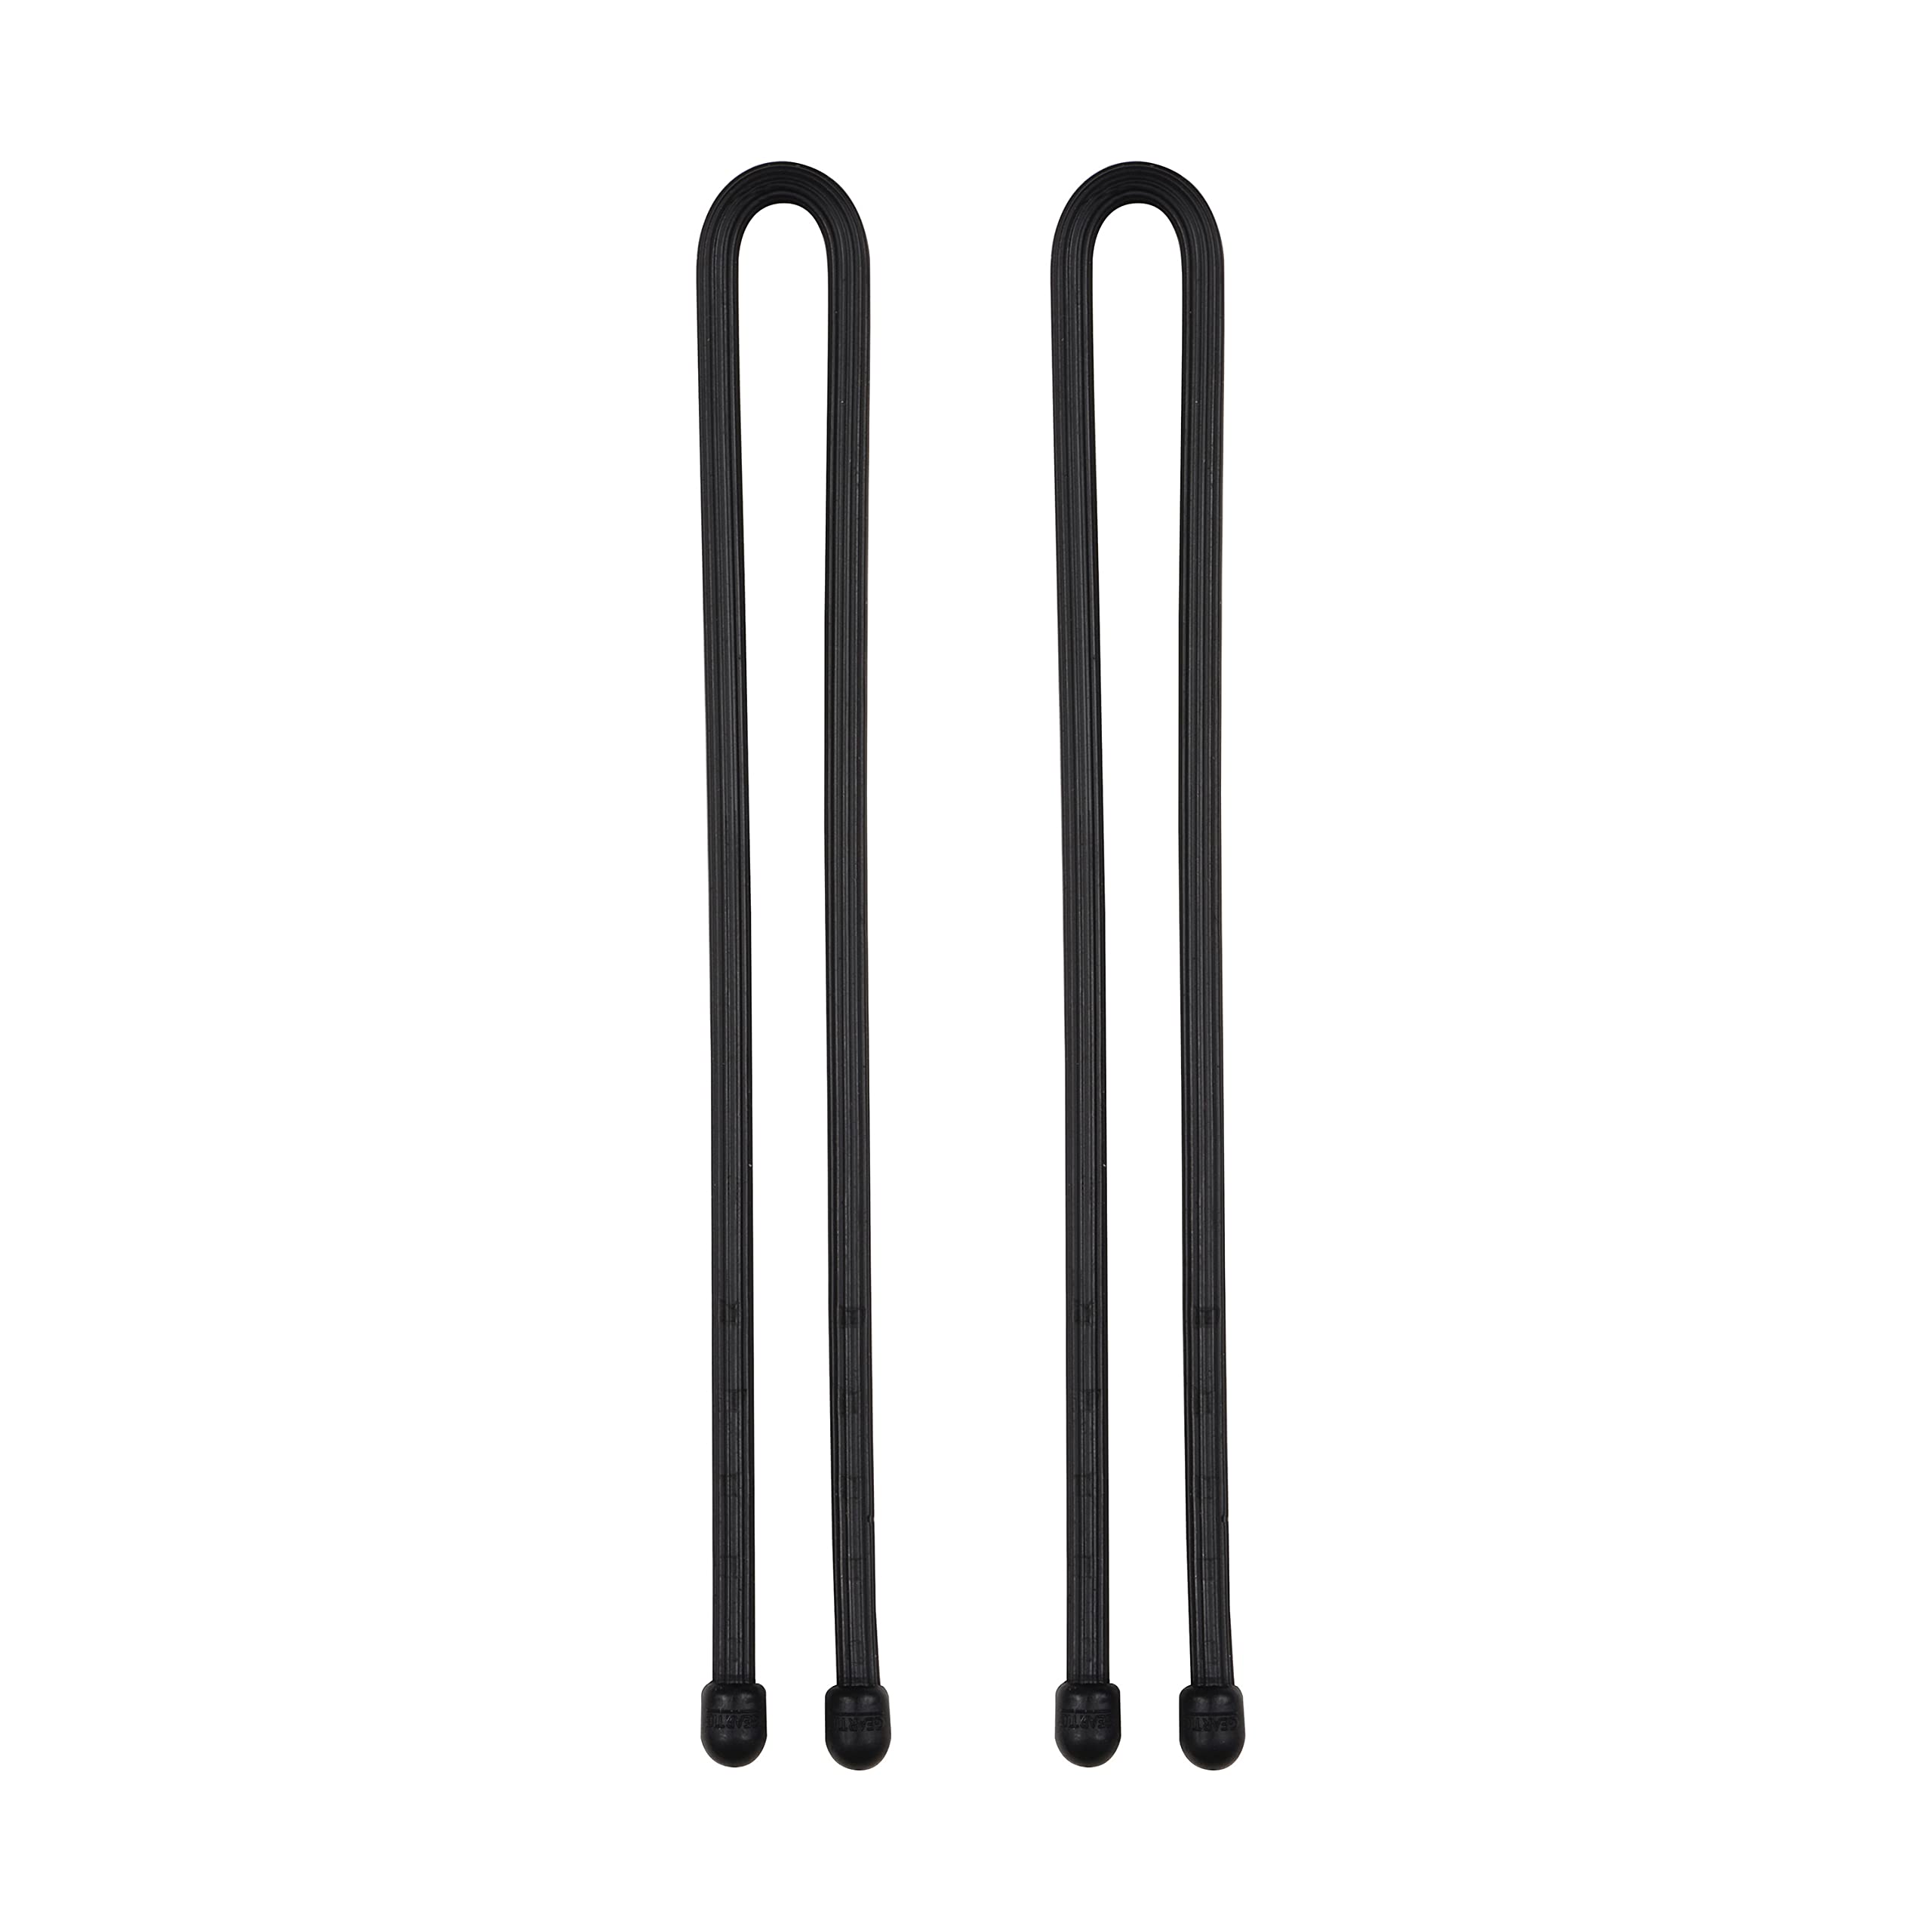 Nite Ize GT12-01-2R3 Original Gear, Reusable Rubber, 12 Inch, Black, 2-Pack, Made in The USA Twist Tie, 2 Count (Pack of 1)